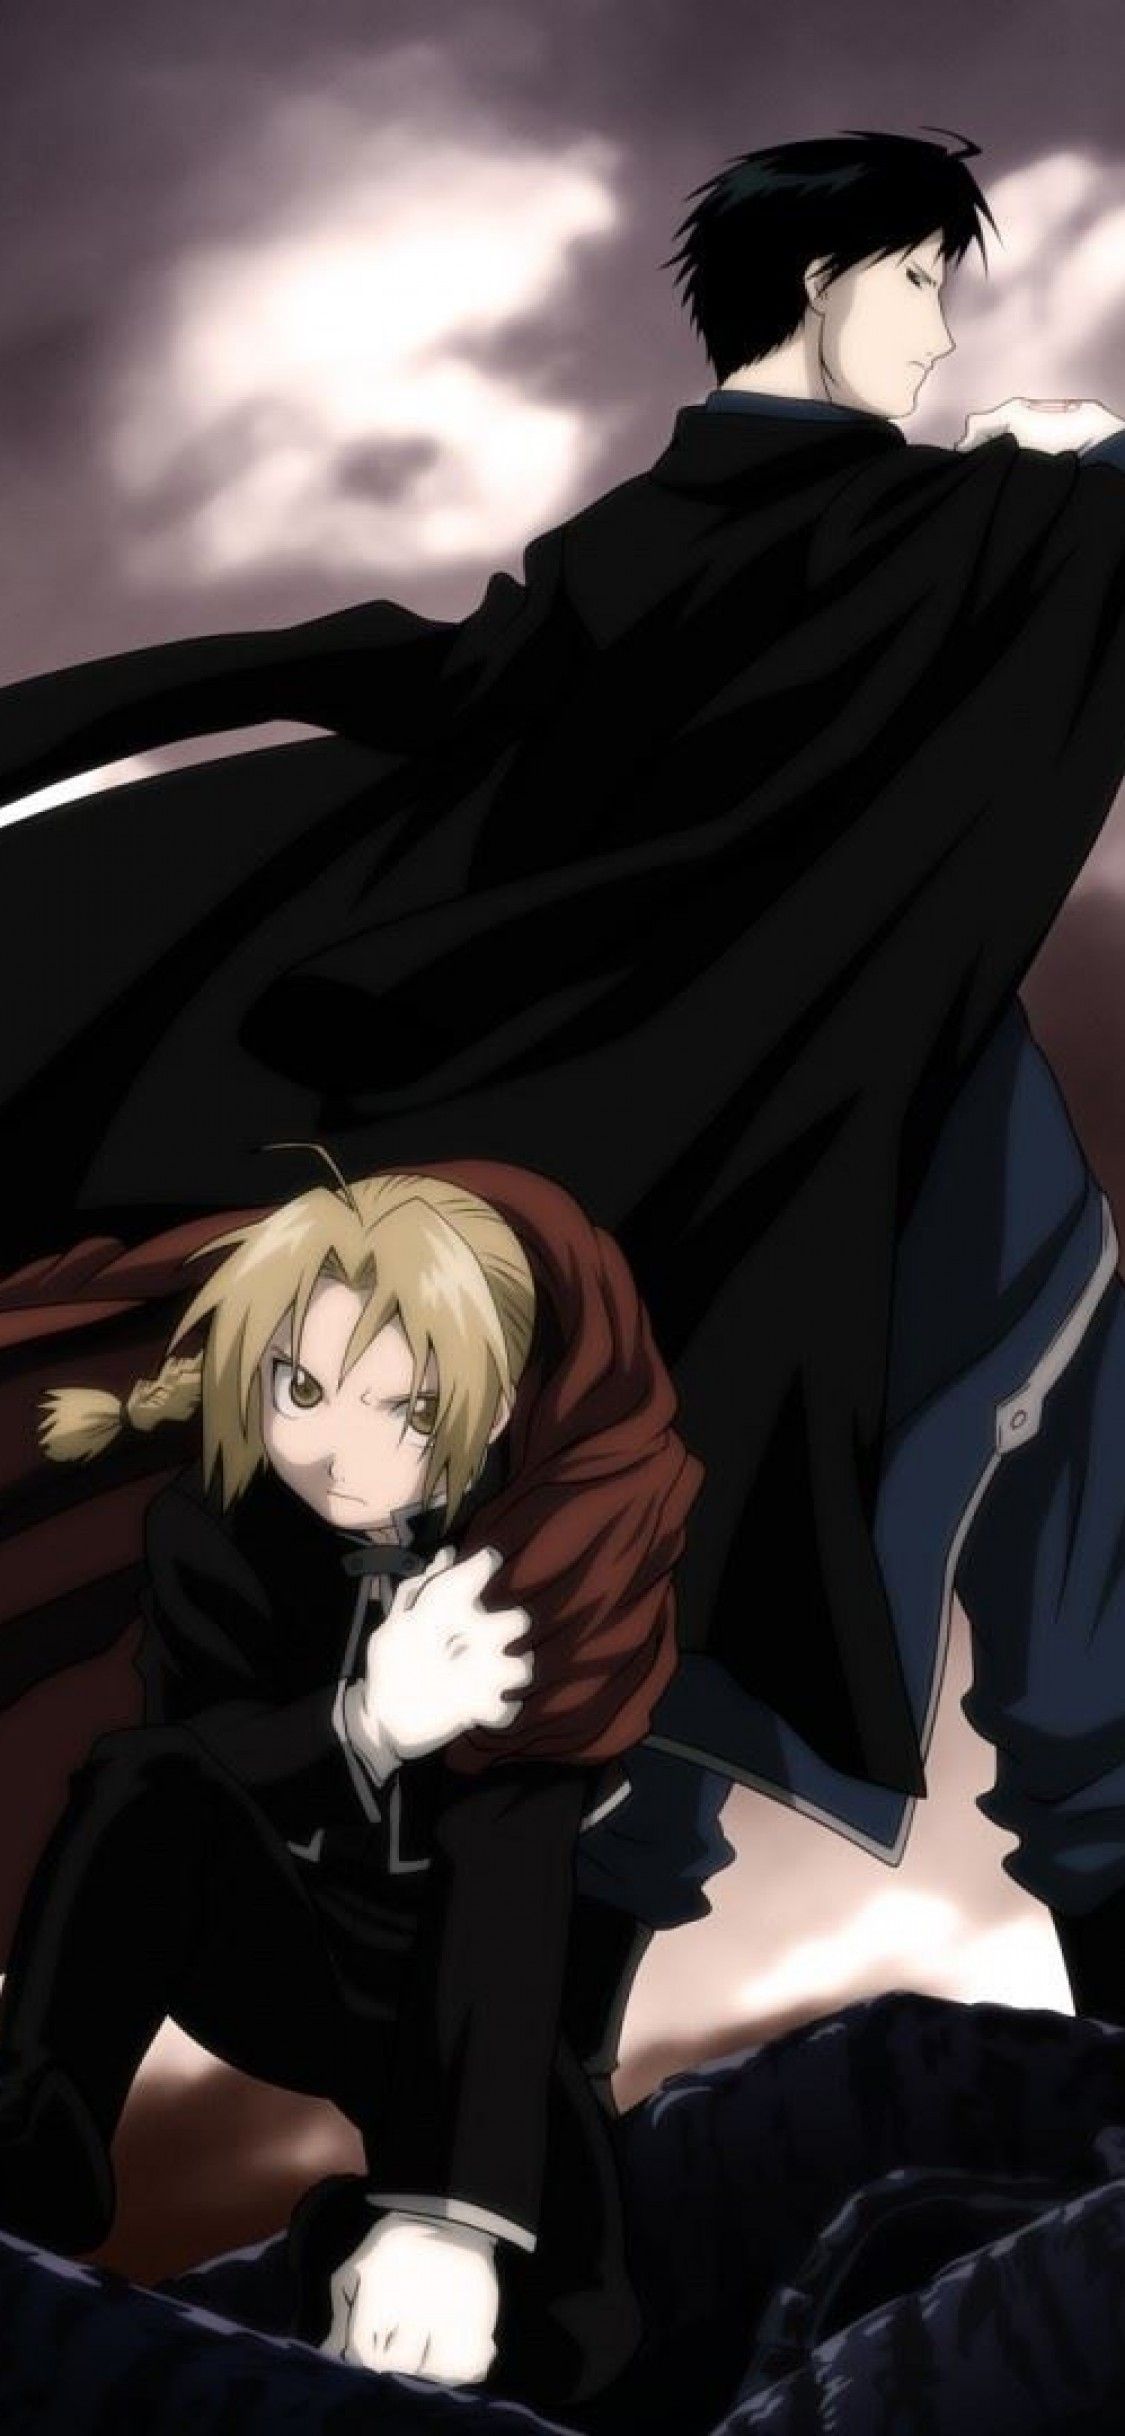 Download 1125x2436 Fullmetal Alchemist, Roy Mustang, Edward Elric Wallpaper for iPhone 11 Pro & X